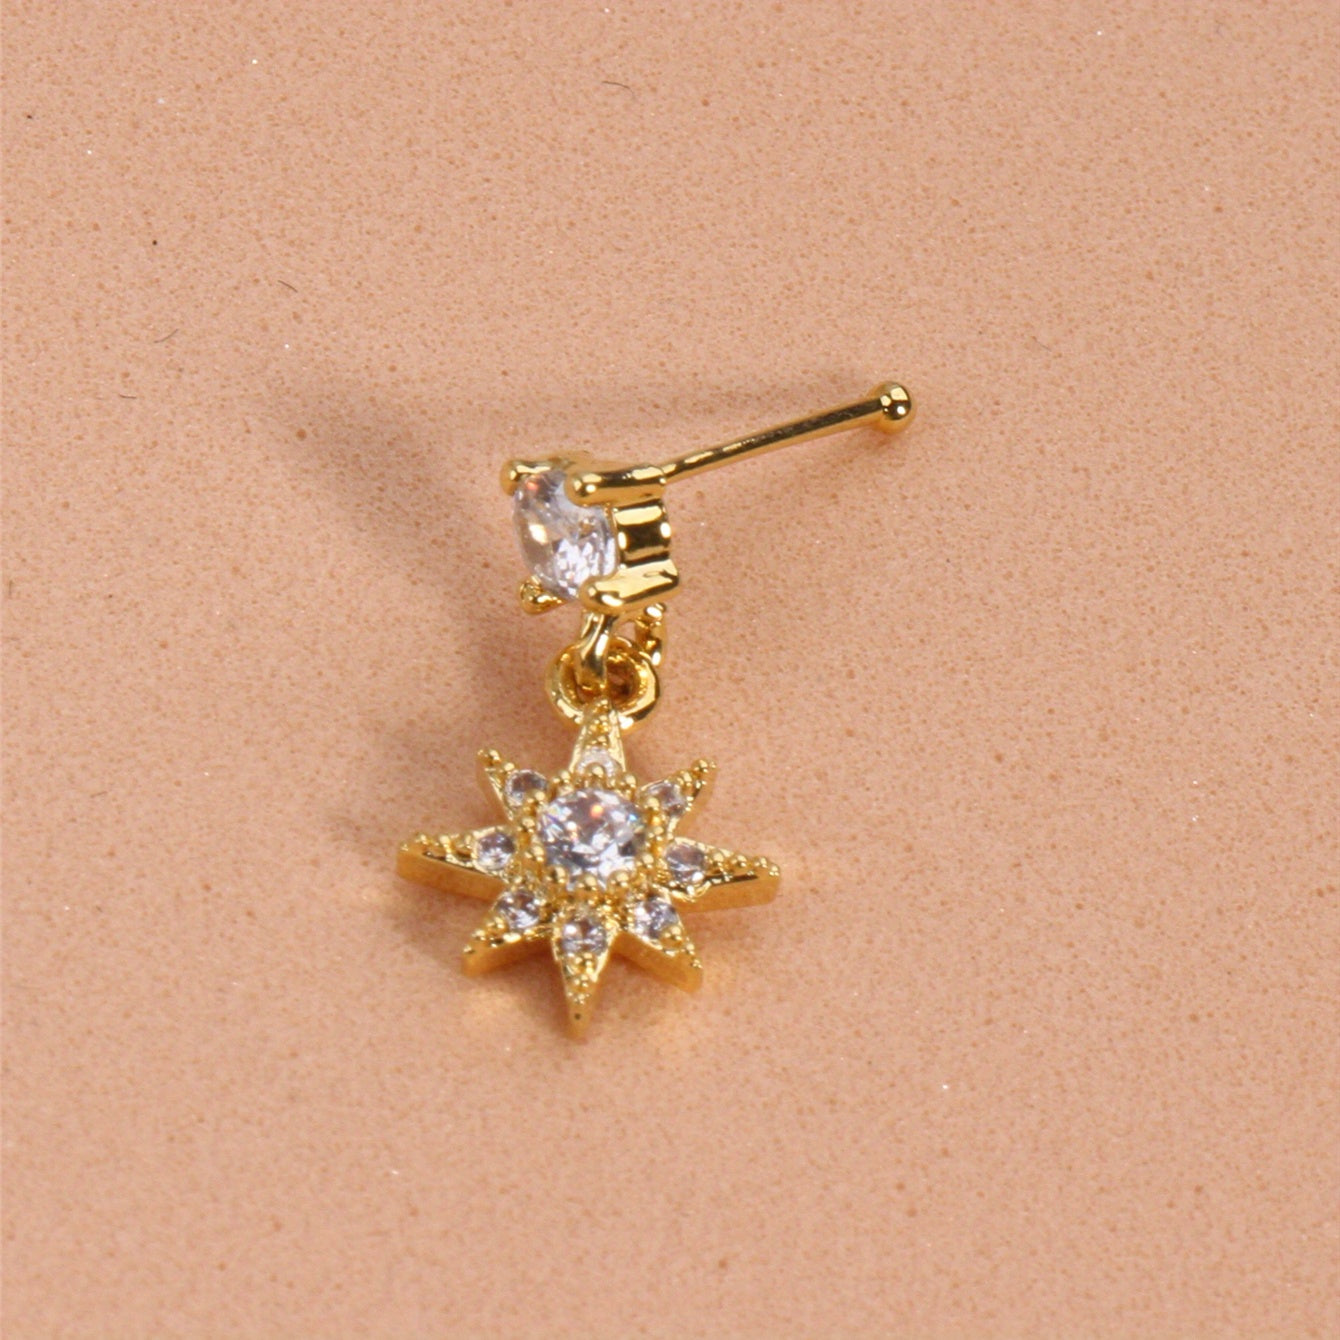 Add a touch of sunshine to your look with our Sun Pendant Nose Ring Stud featuring Shiny Zircon Inlay